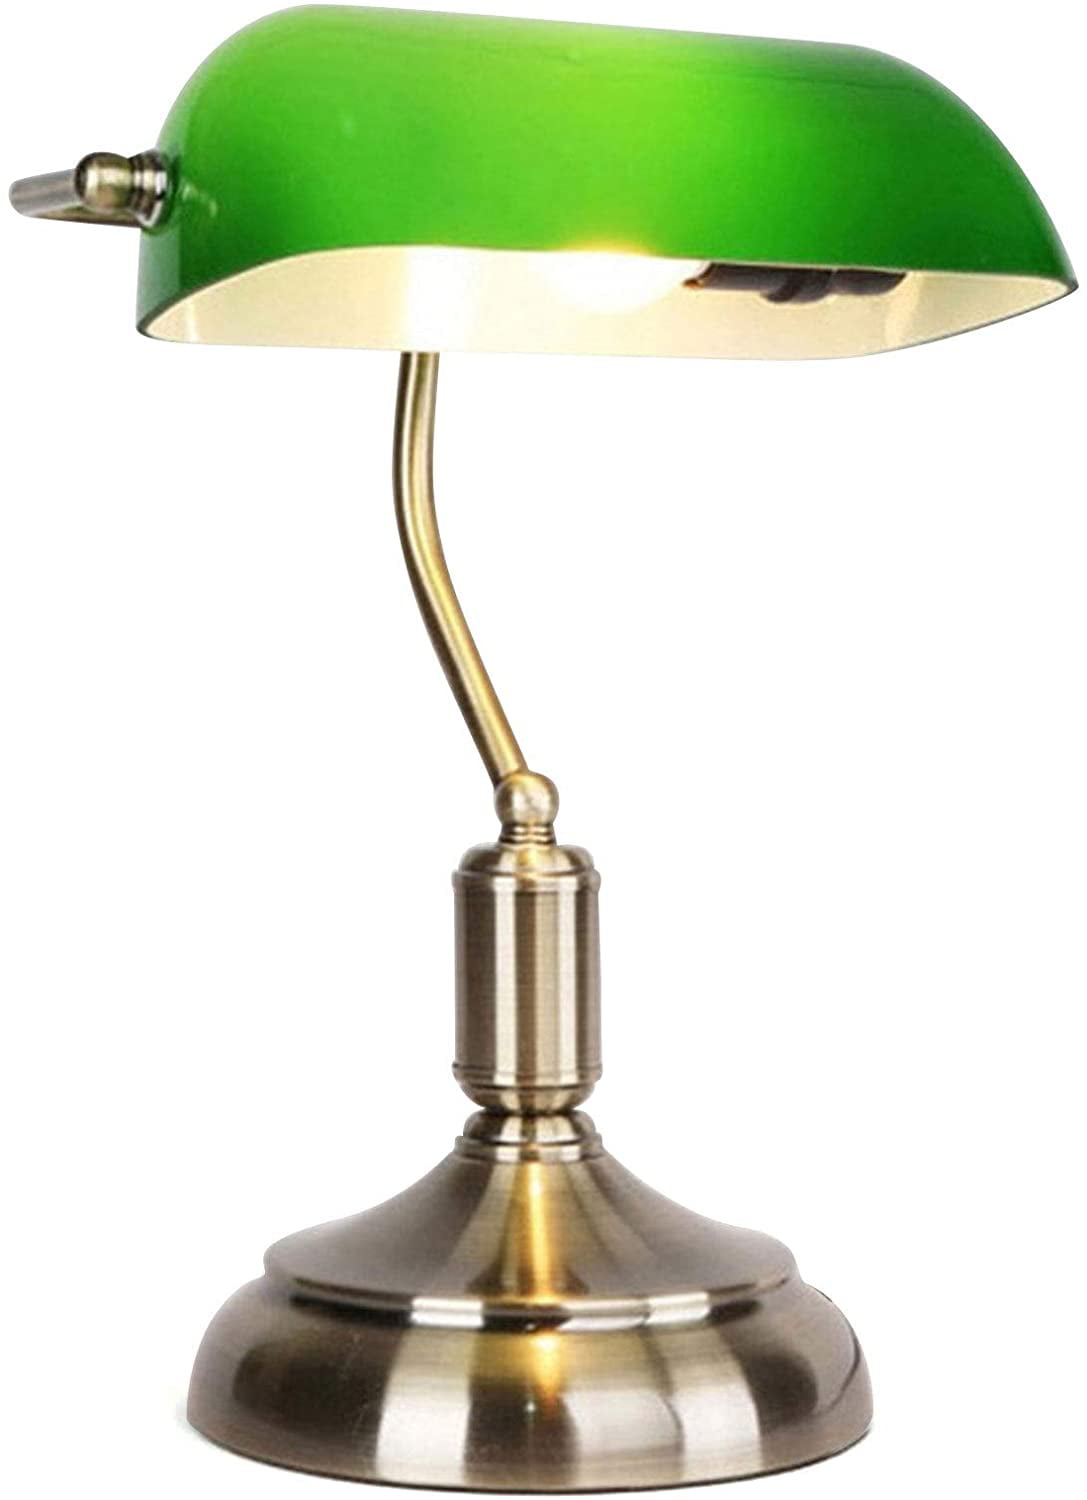 Retro Bankers Lamp Reading Light Green Glass Shade Brass Stand Office 60W 110V